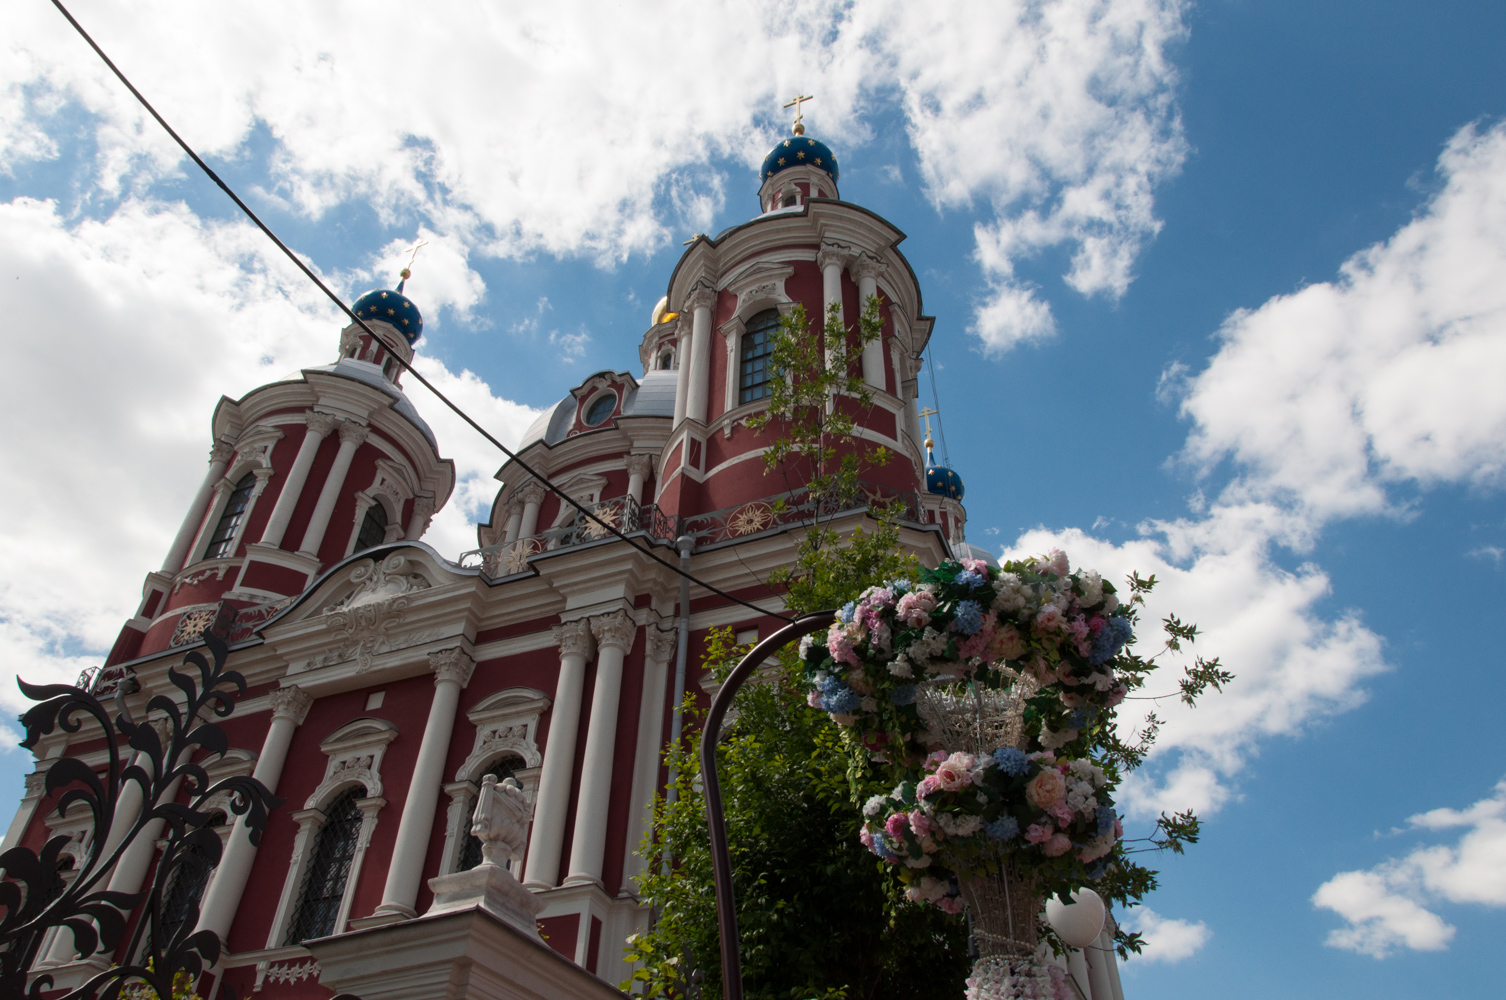 Cool things to do in Moscow, Russia